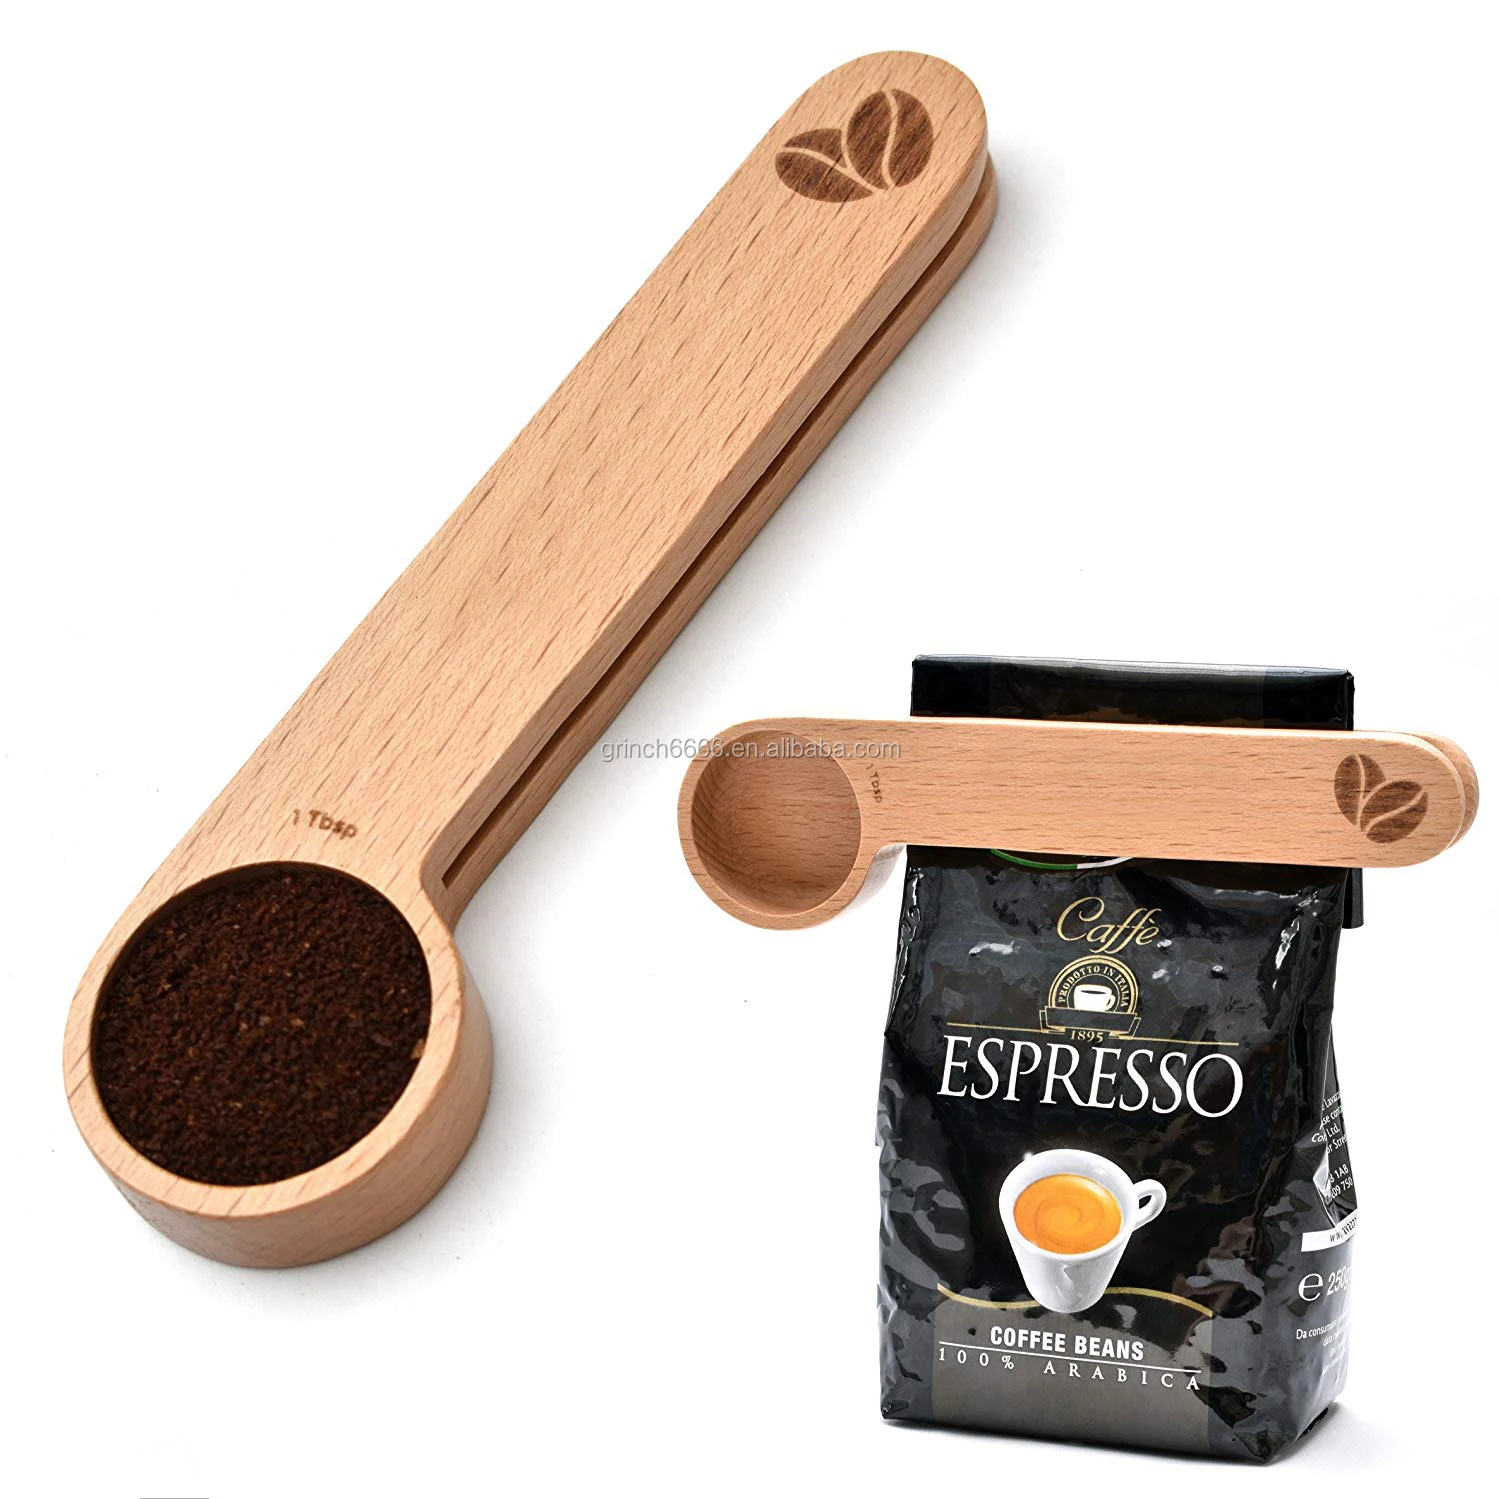 

2 in 1 Wooden Coffee Scoop and Bag Clip 1 Tablespoon Solid Beech Wood Measuring Scoop Espresso Coffee Bags Sealer, Customized